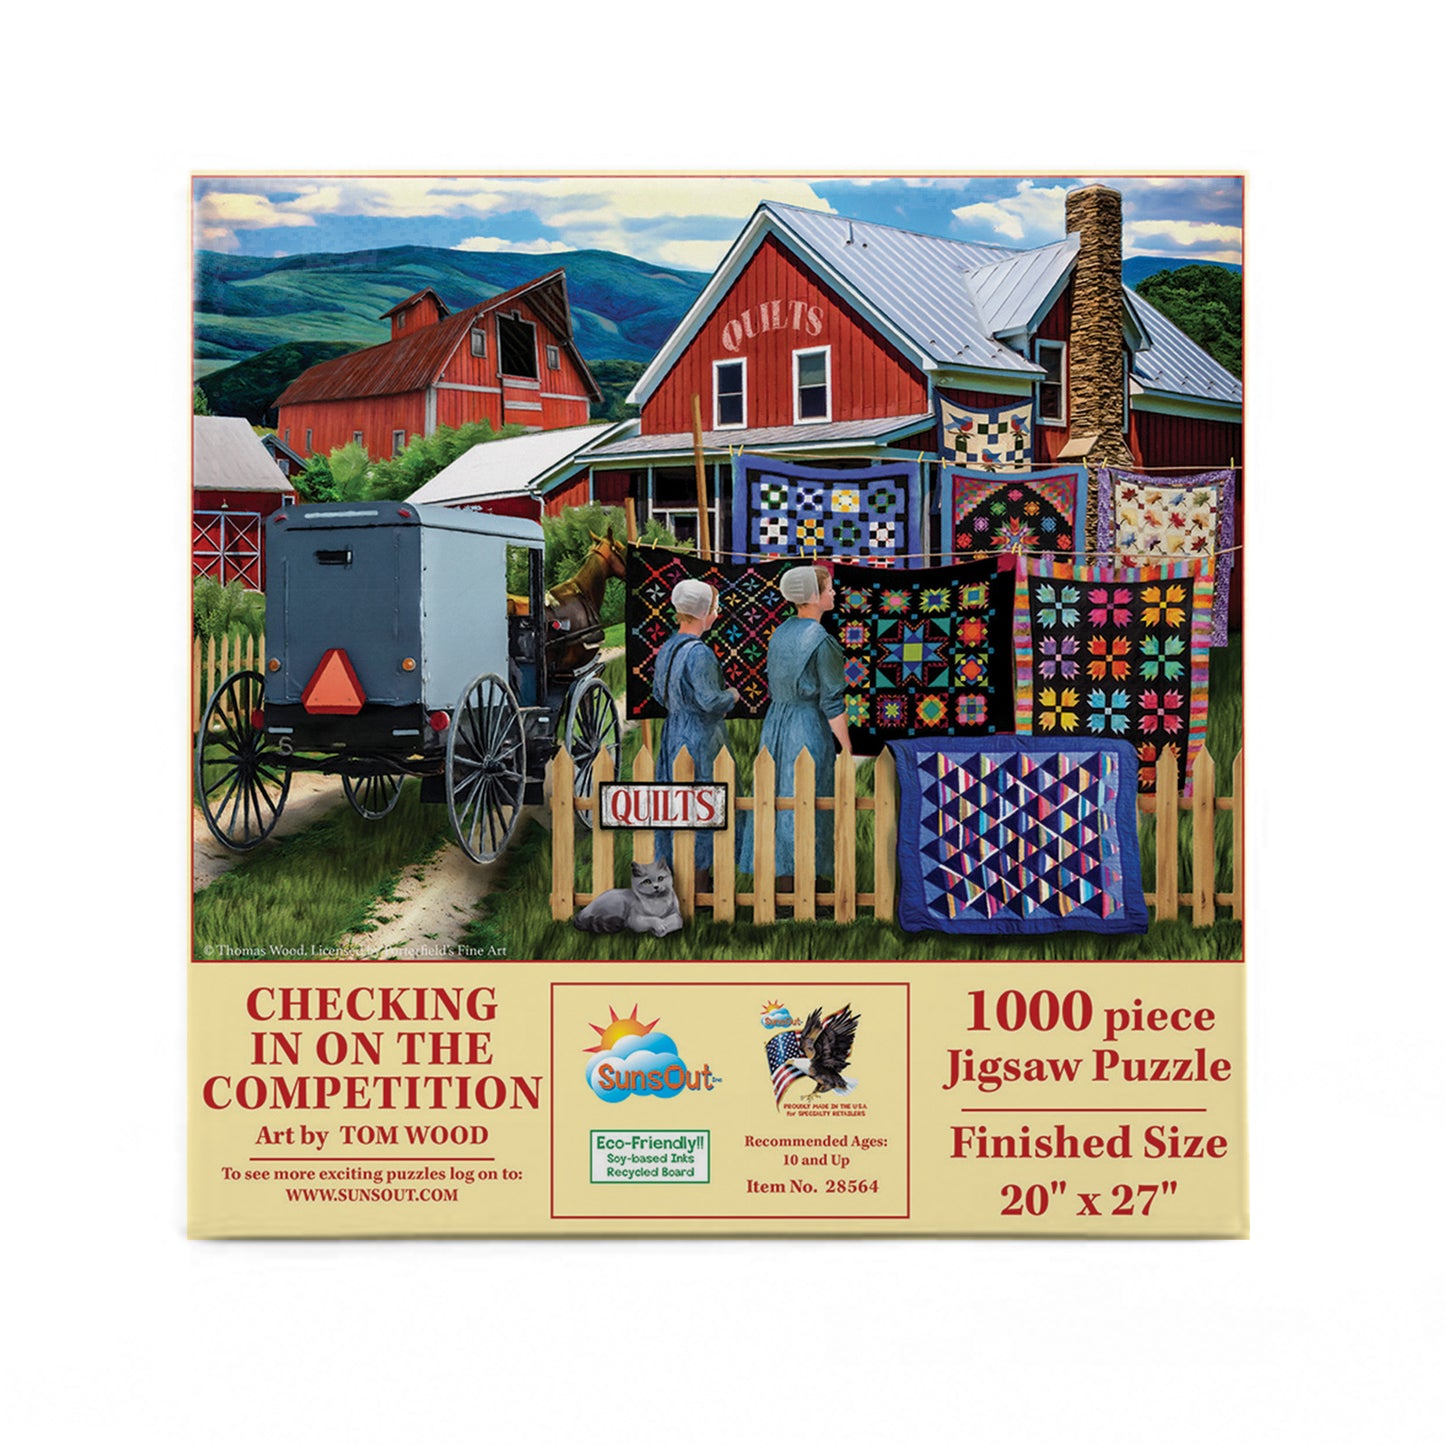 Checking in on the Competition - 1000 Piece Jigsaw Puzzle